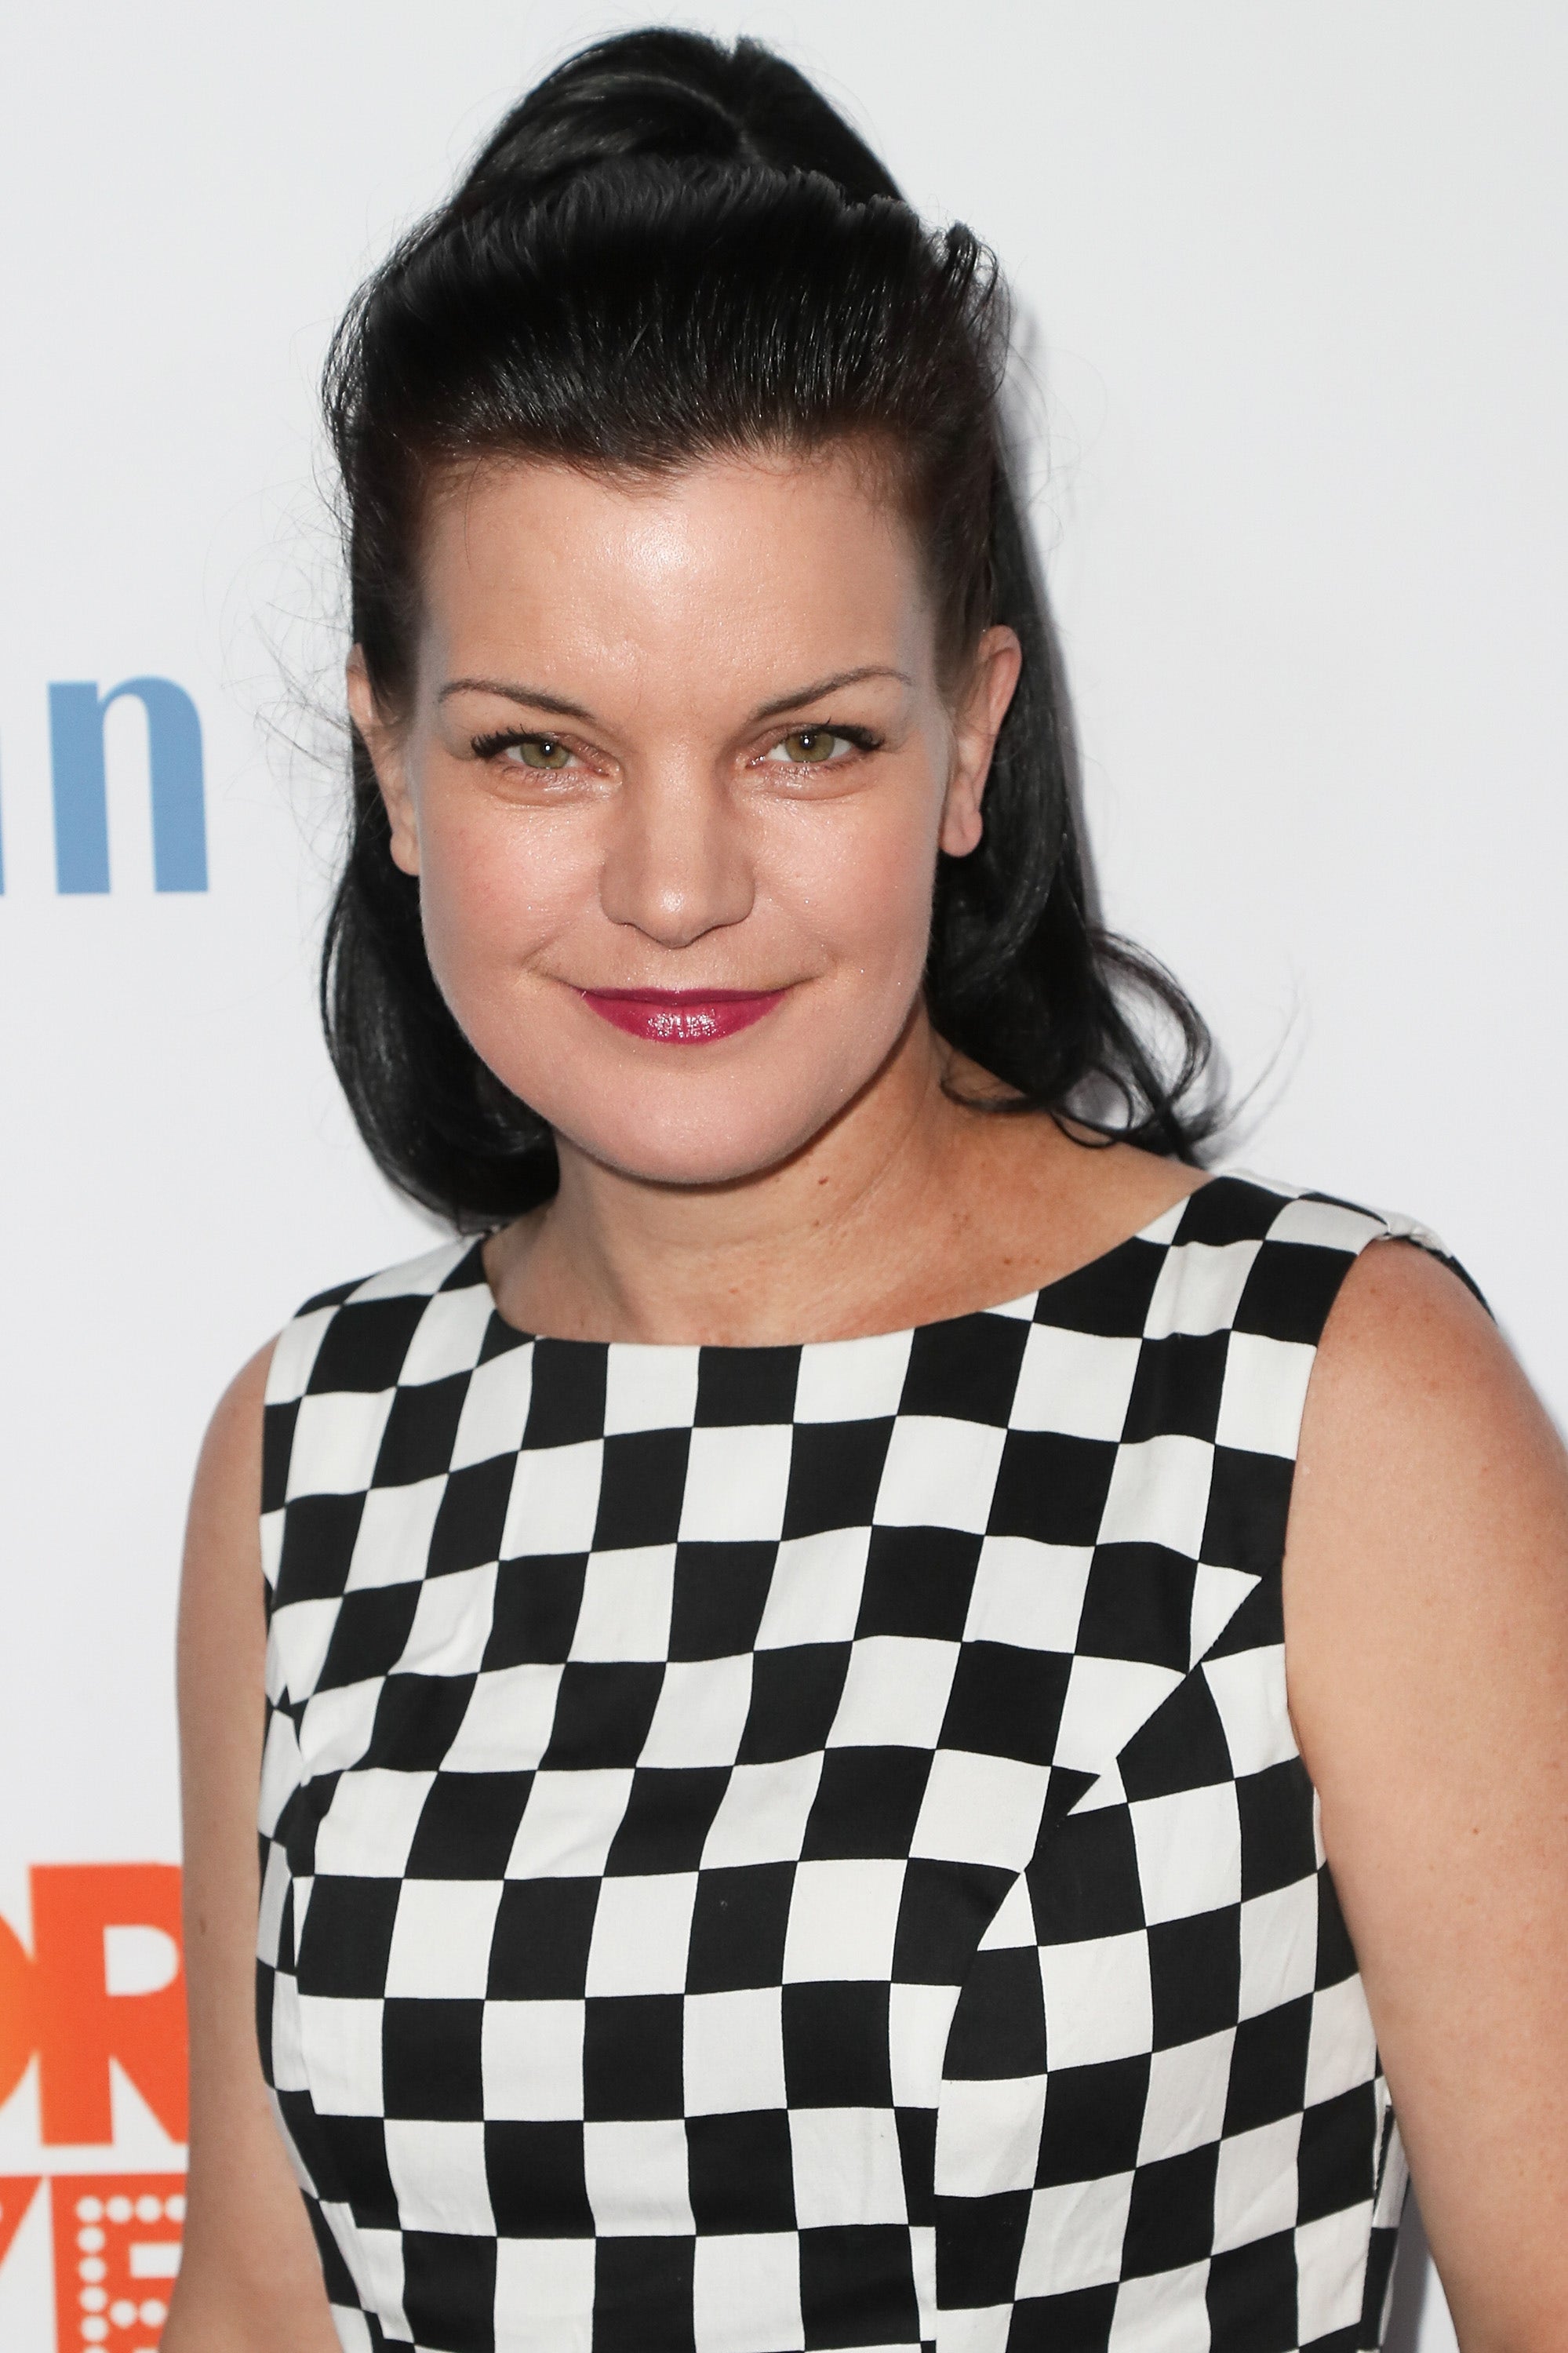 Pauley Perrette, best known for her role in 